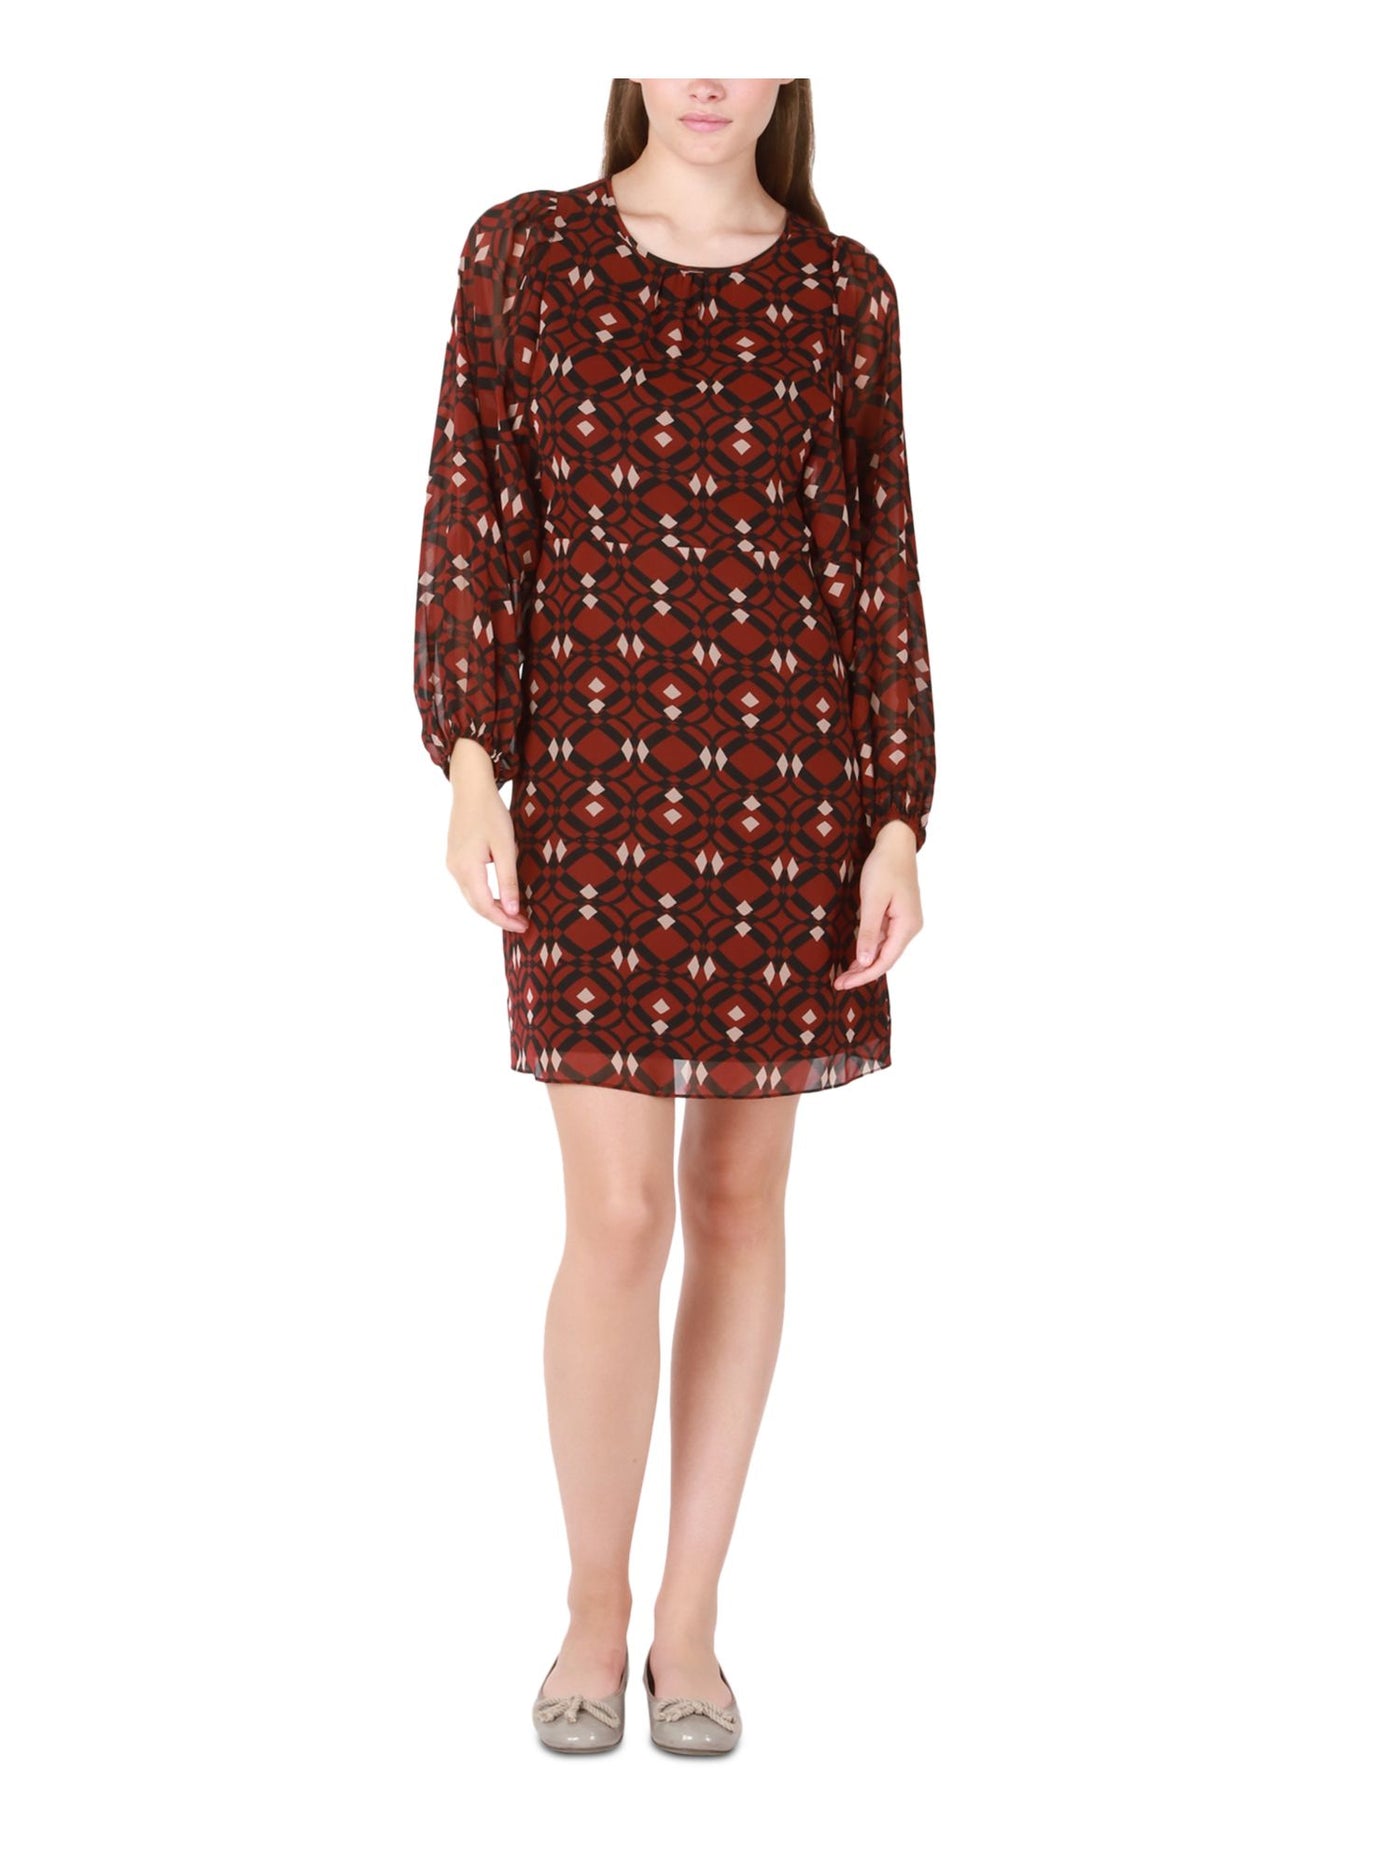 BLACK TAPE Womens Maroon Lined Zippered Printed Long Sleeve Round Neck Short Fit + Flare Dress S